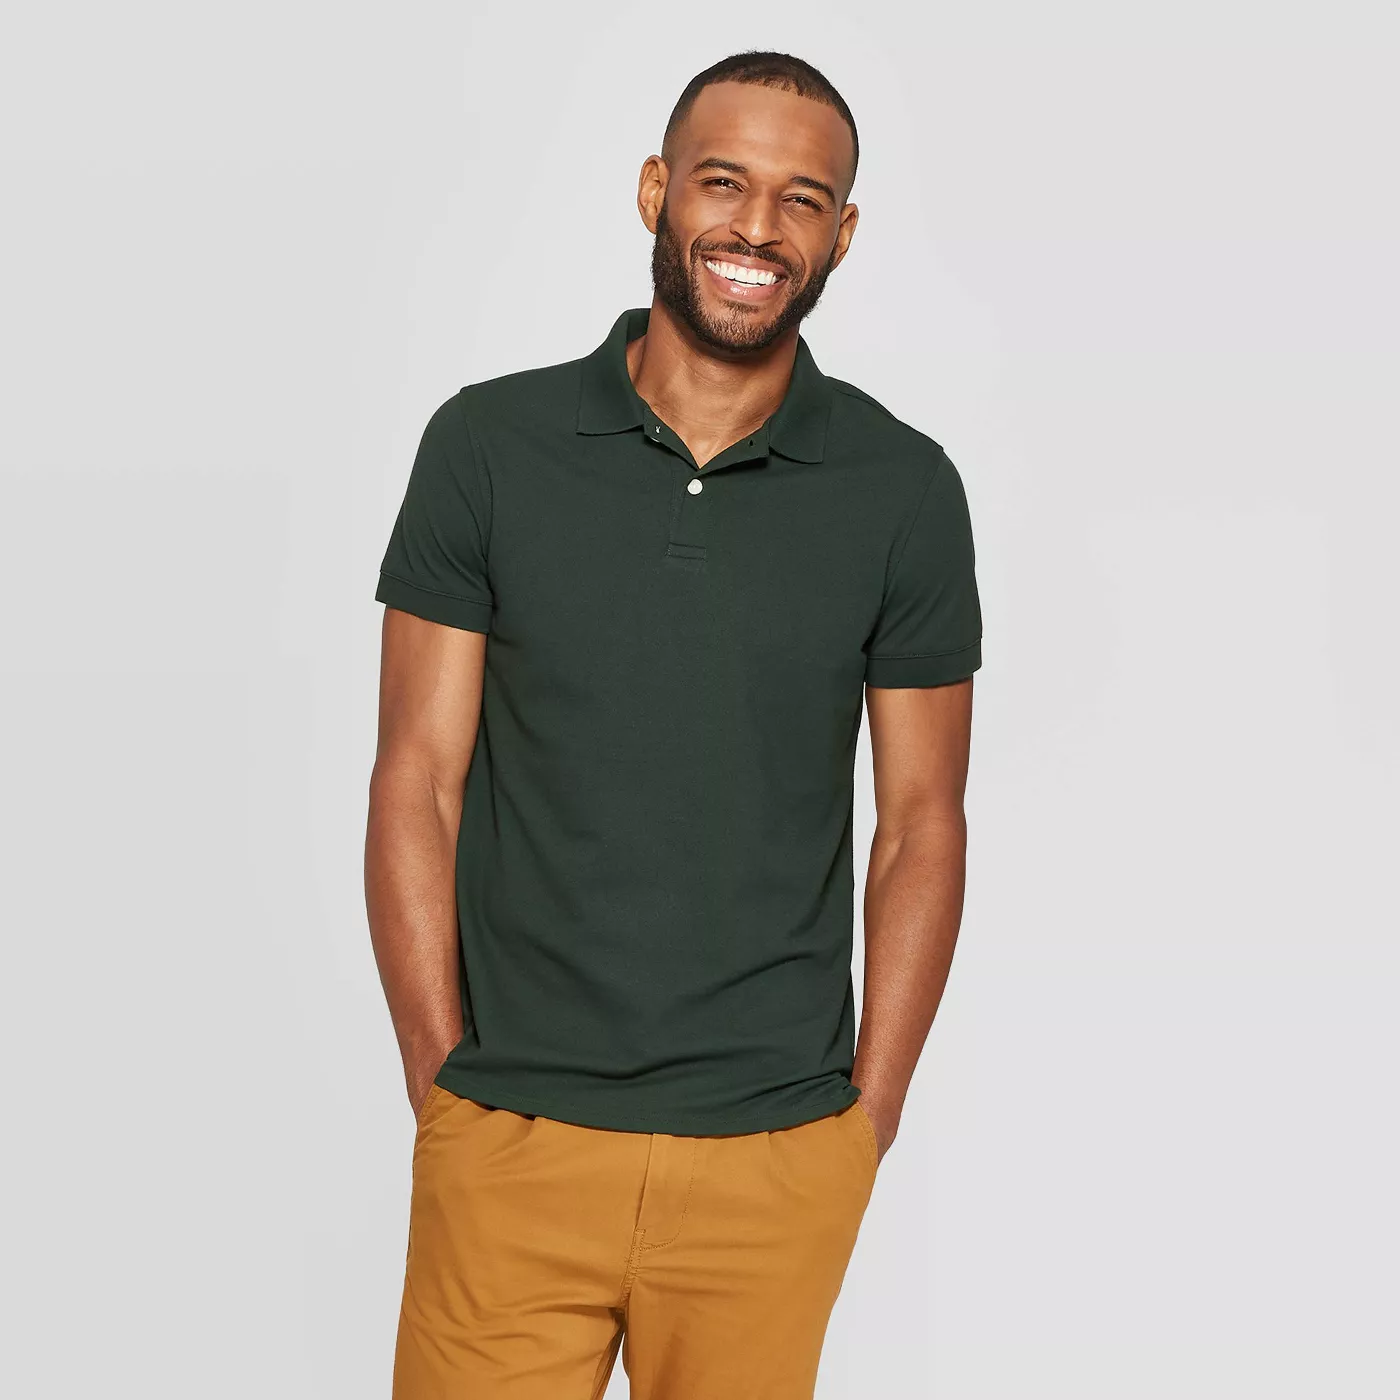 Men's Standard Fit Short Sleeve Loring Polo T - Shirt - Goodfellow & Co™ - image 1 of 3